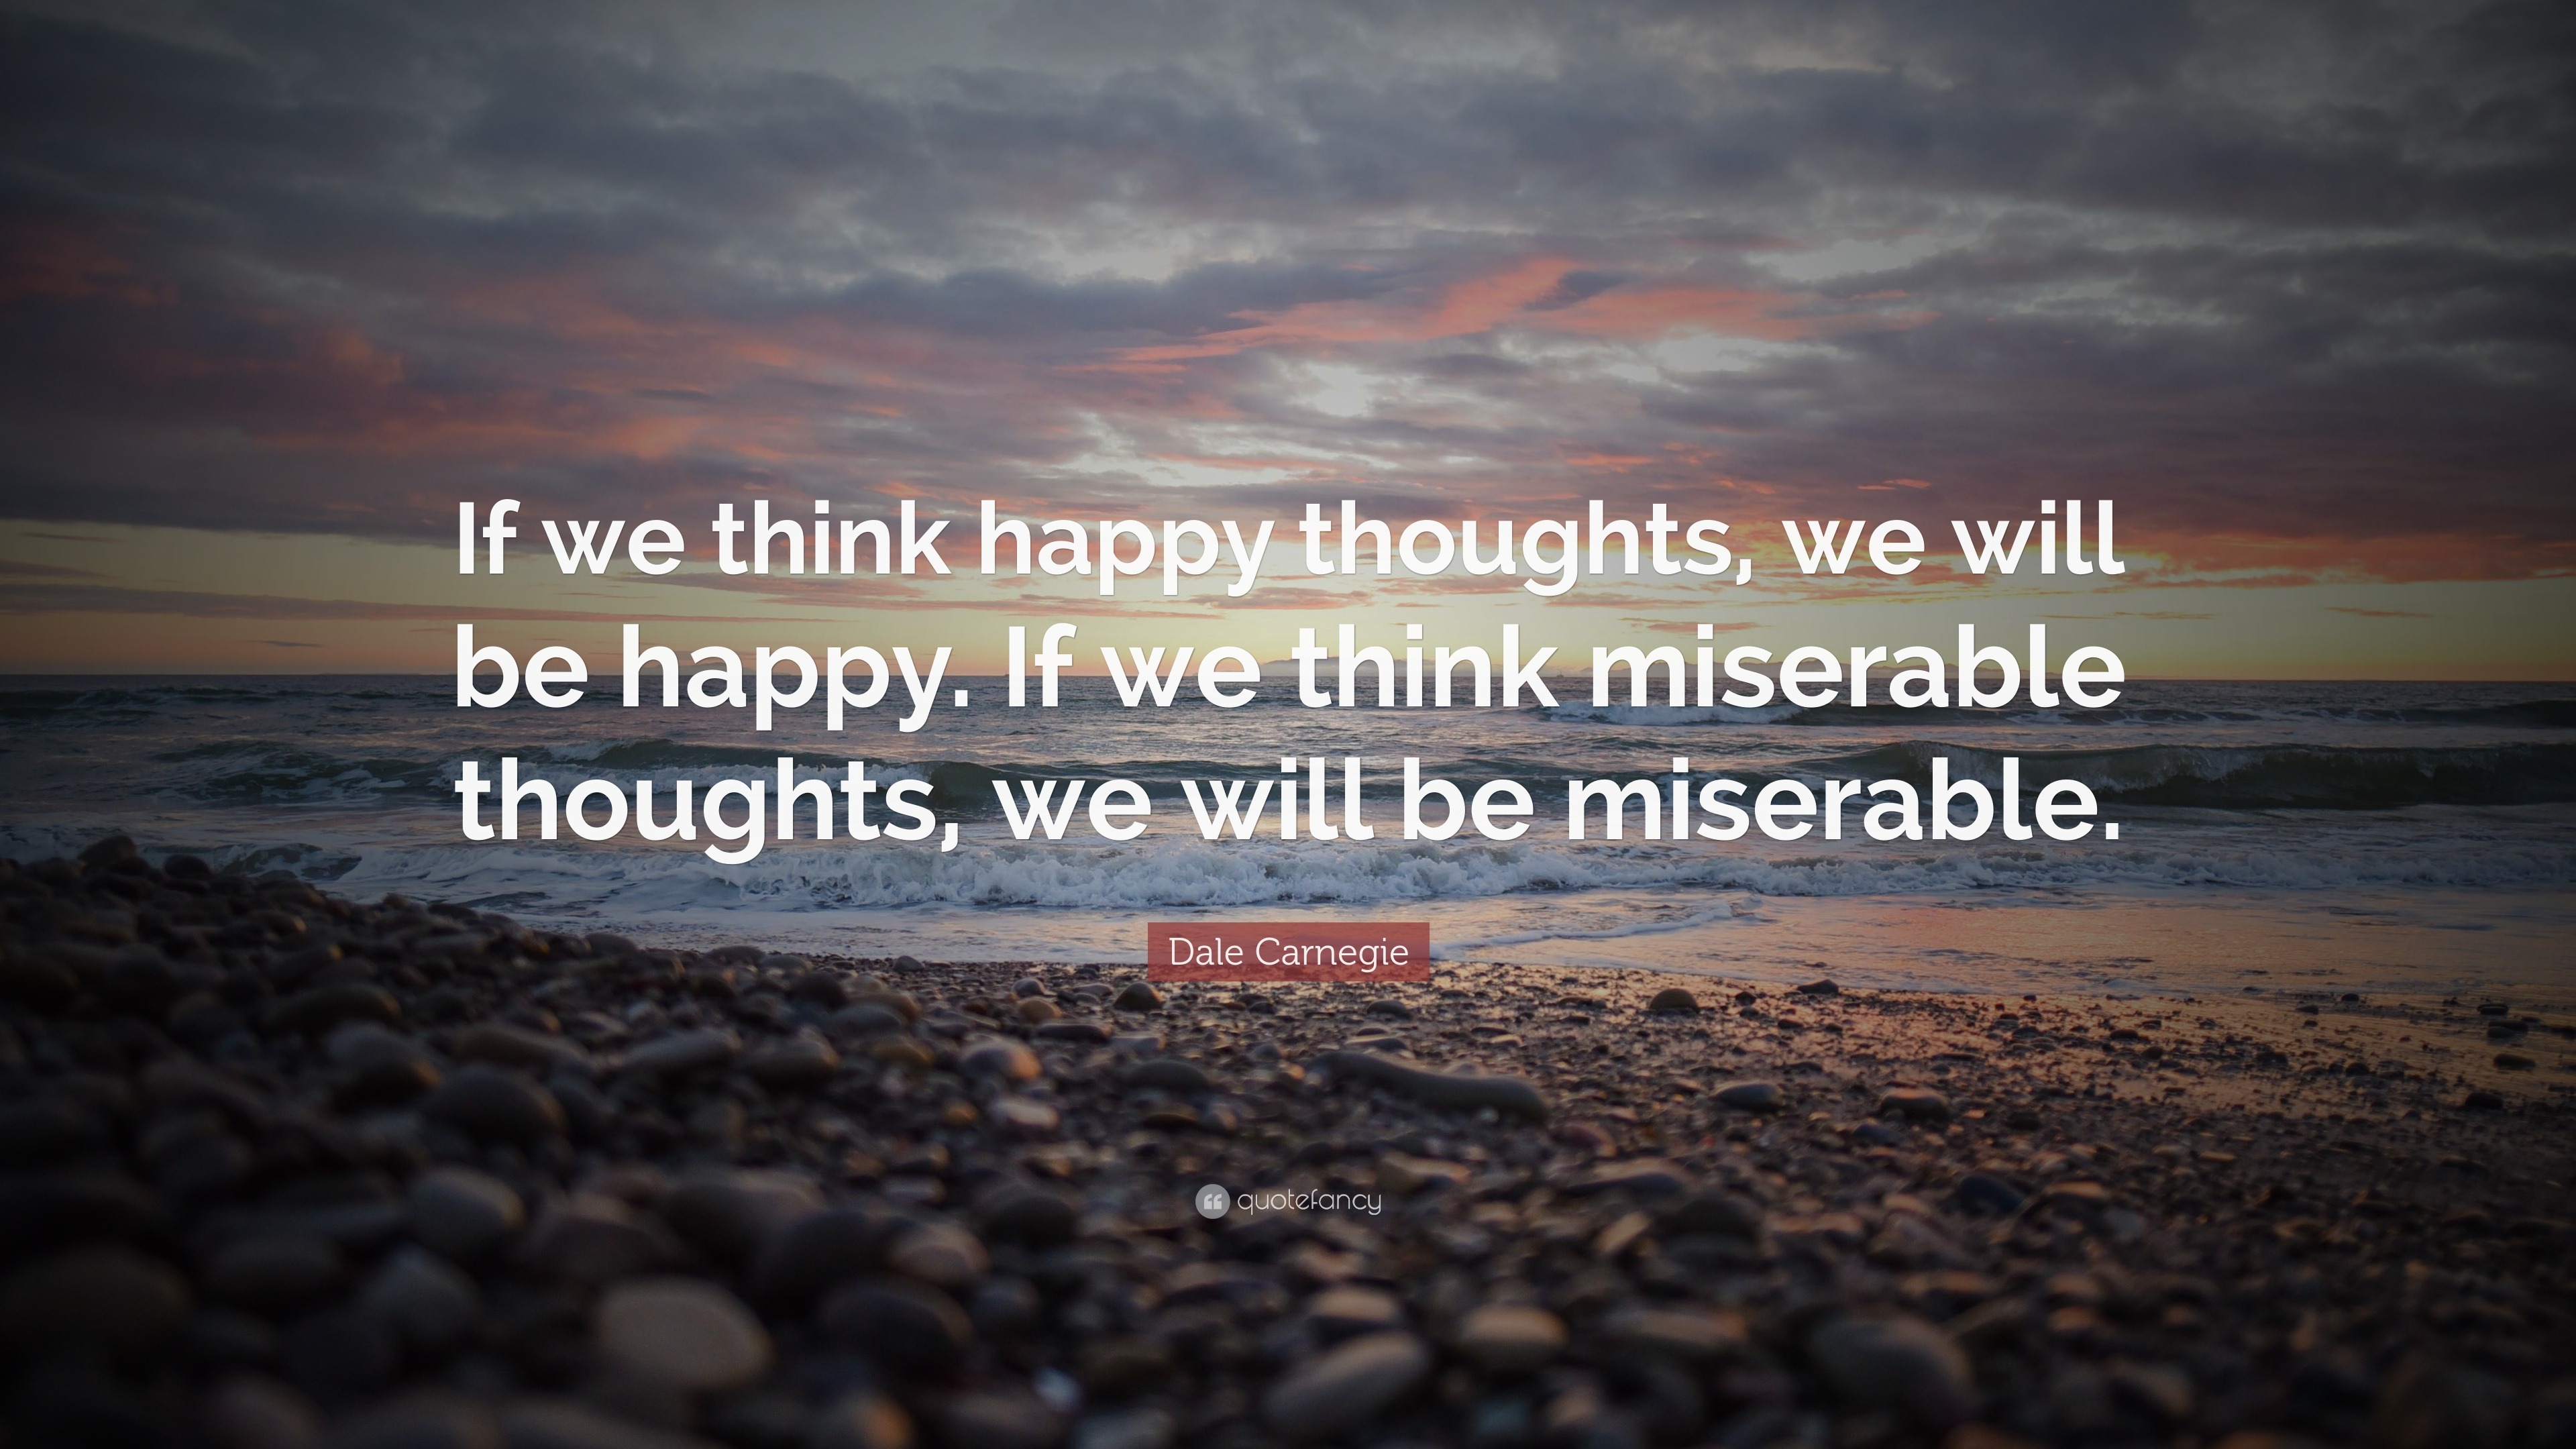 https://quotefancy.com/media/wallpaper/3840x2160/88289-Dale-Carnegie-Quote-If-we-think-happy-thoughts-we-will-be-happy-If.jpg